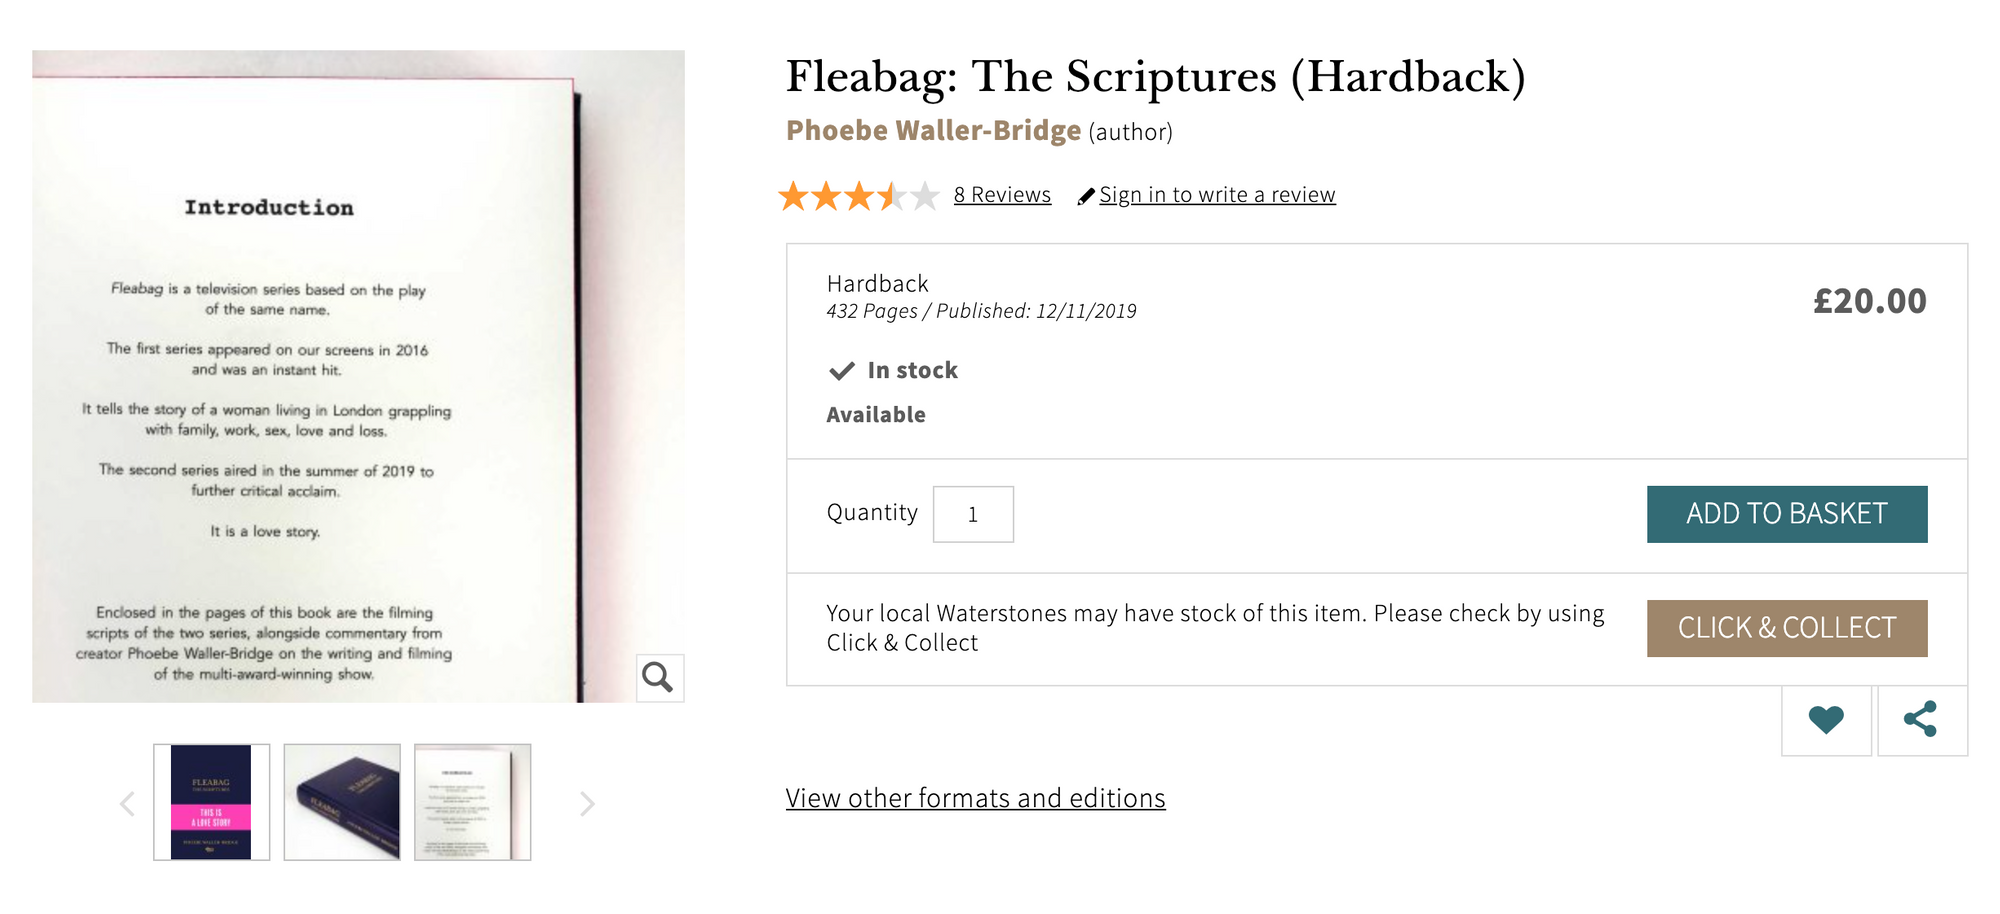 A screencap of the Waterstones.com listing for Fleabag: The Scriptures